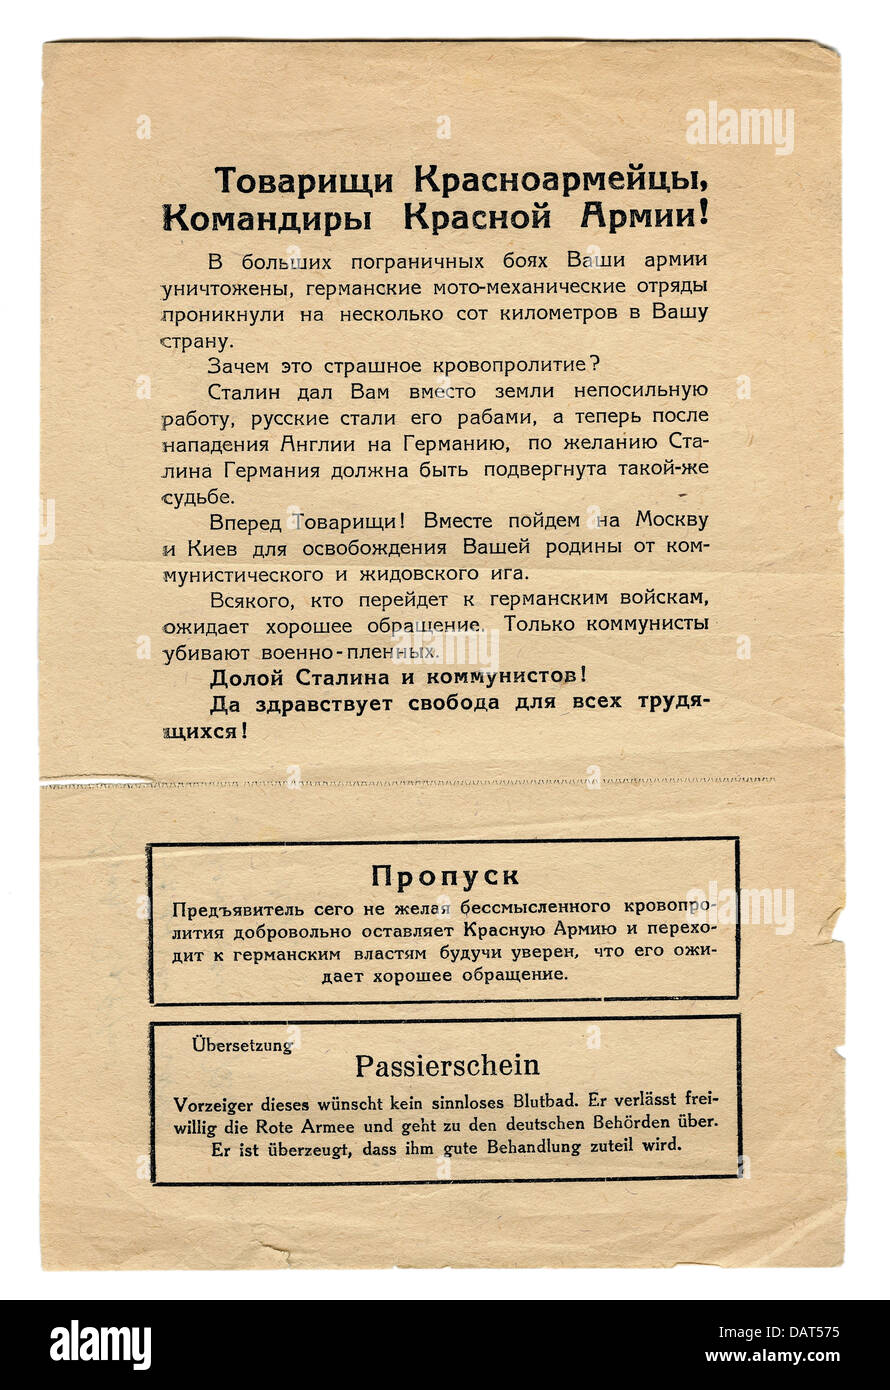 events, Second World War / WWII, propaganda, German leaflet with pass for Soviet soldiers, 1941, Additional-Rights-Clearences-Not Available Stock Photo